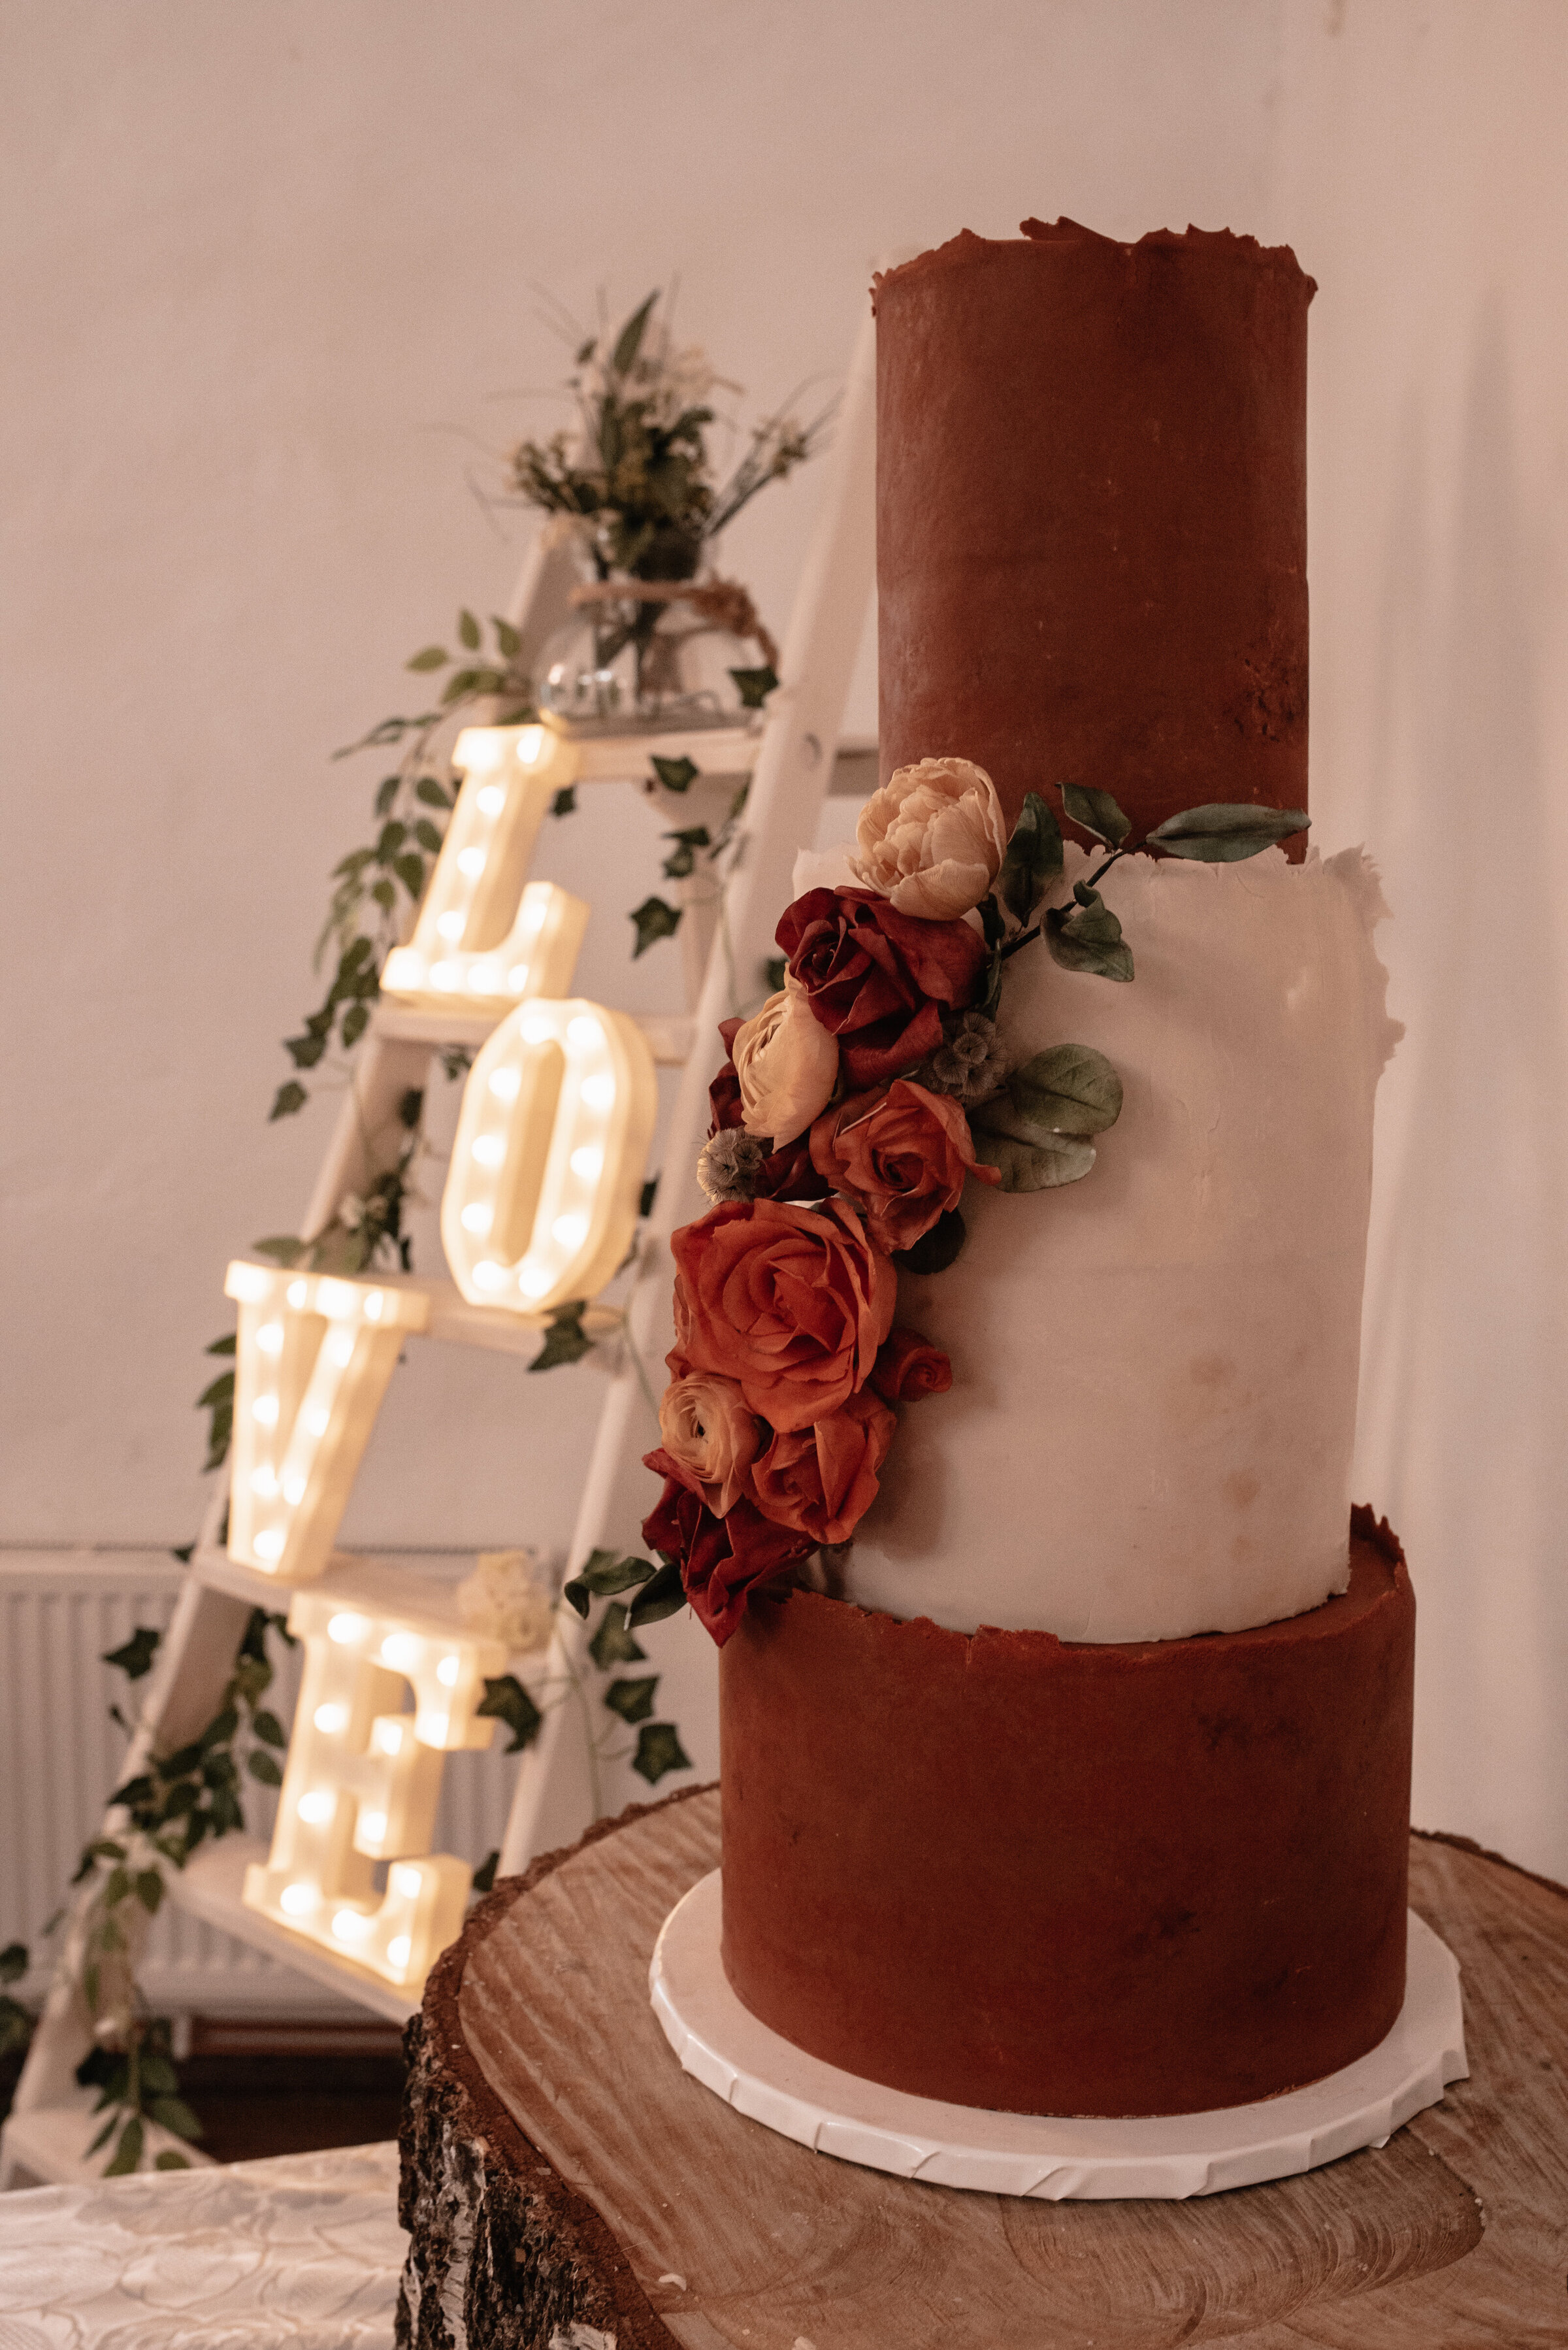 Three tier wedding cake decorated with real flowers in front of wedding ladder with light up love signs